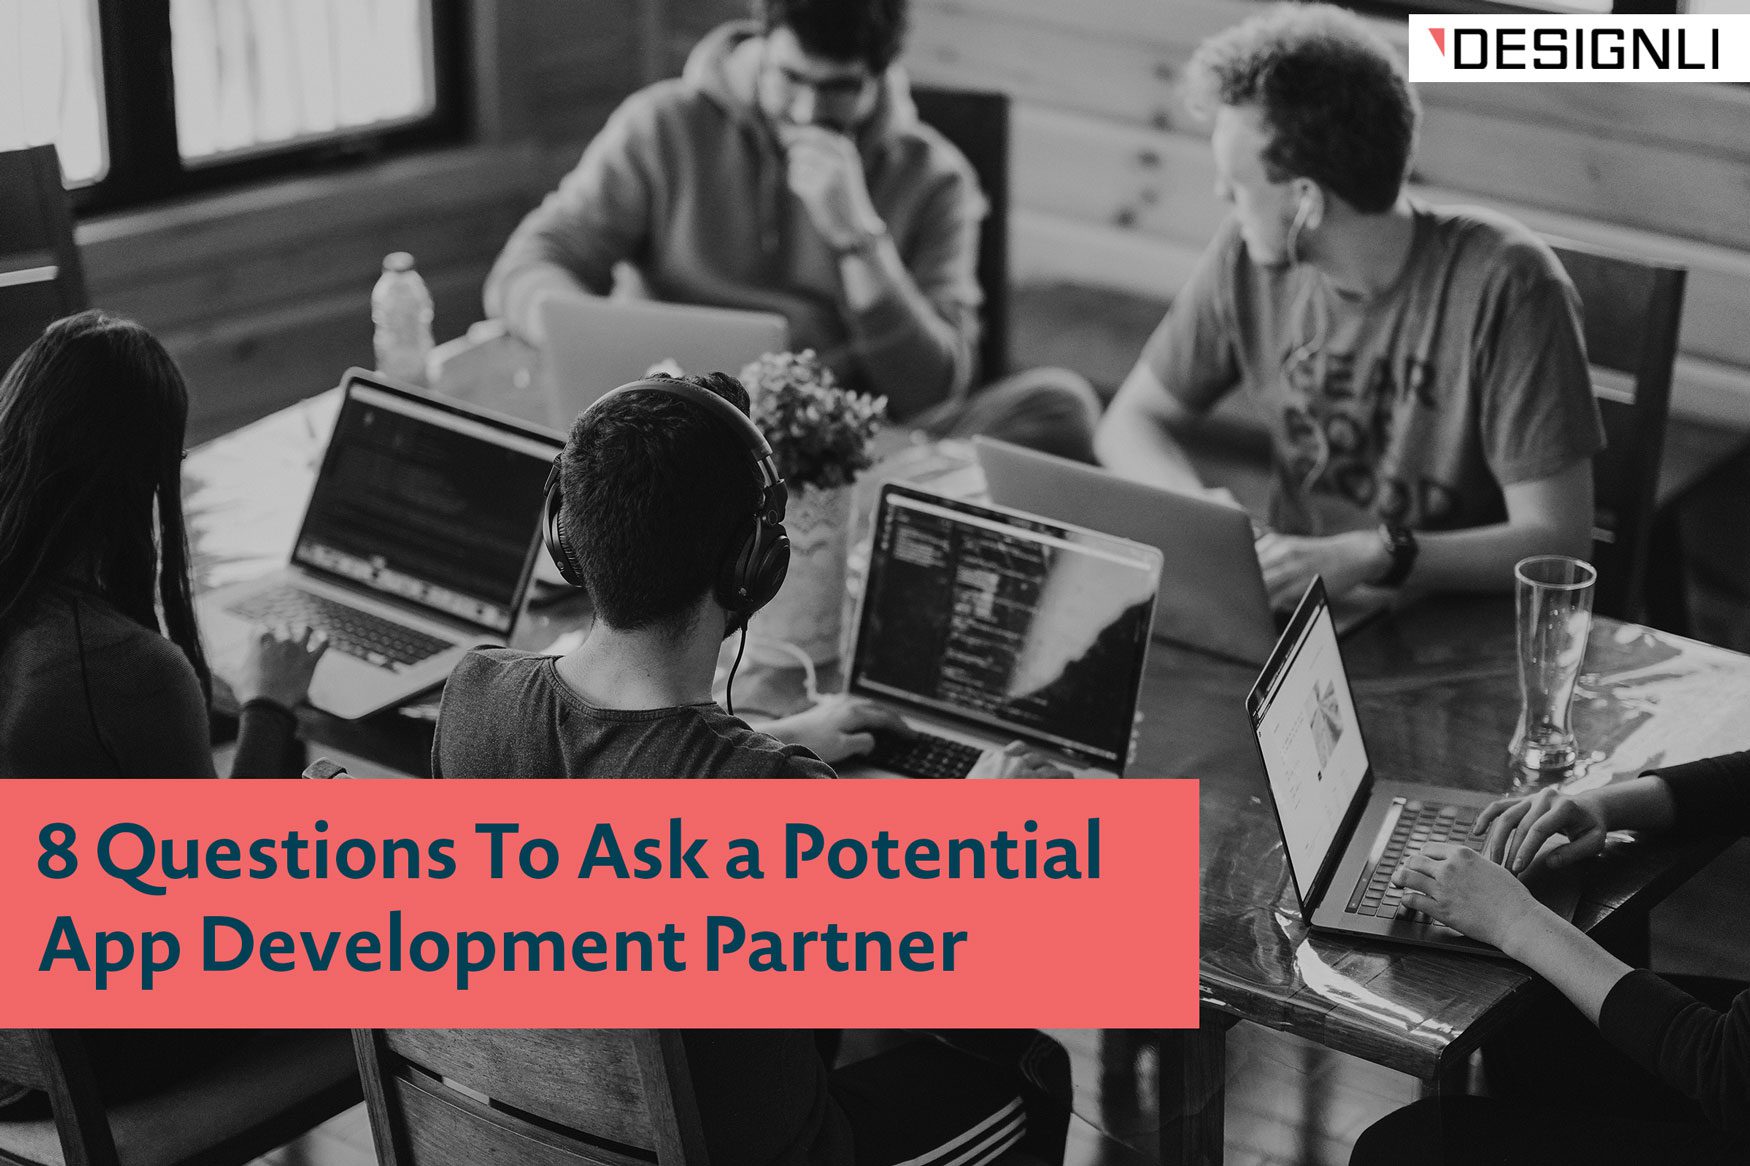 8 Questions To Ask a Potential App Development Partner